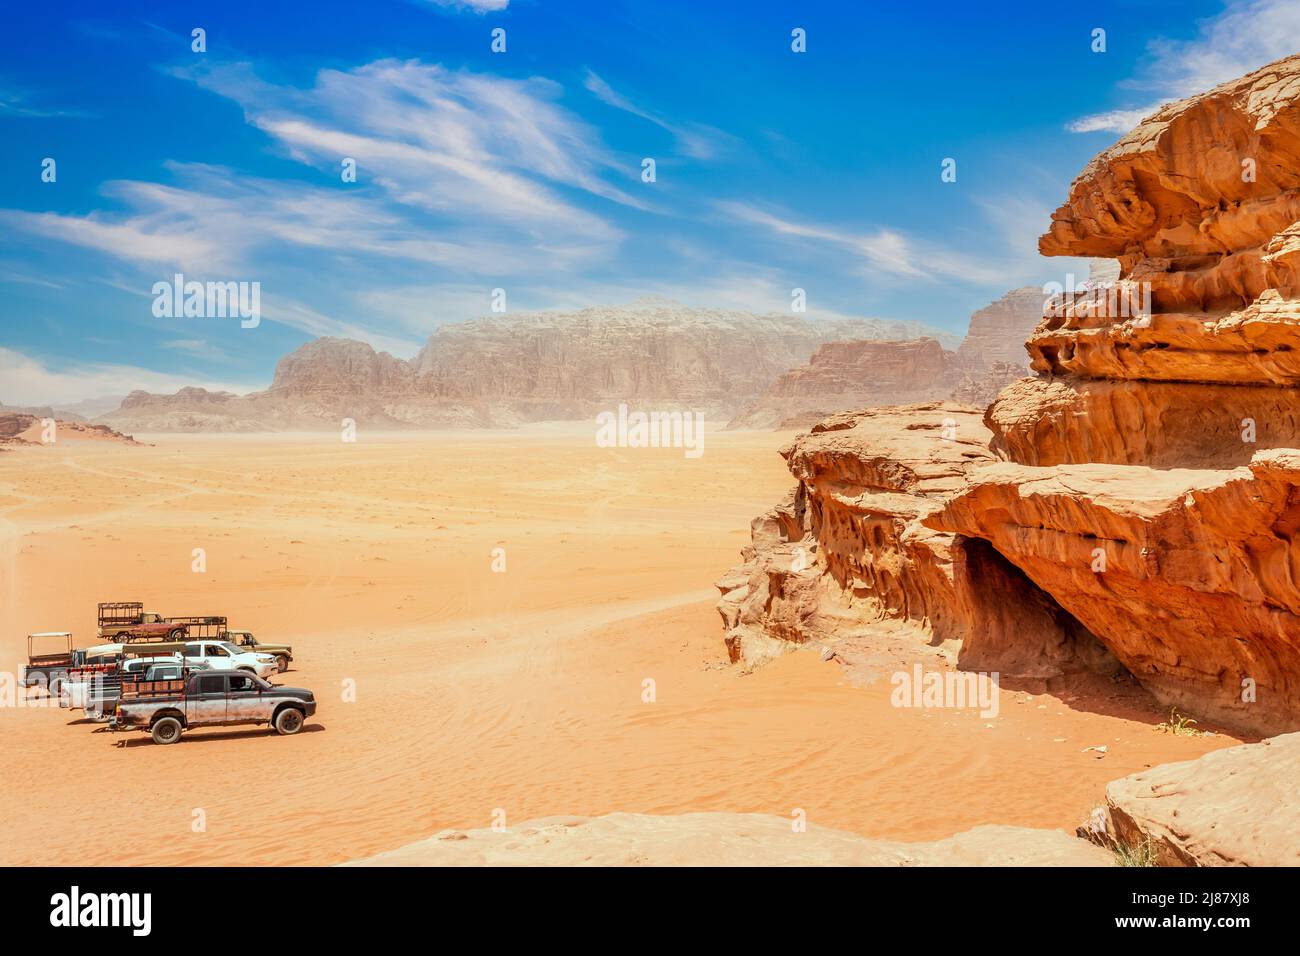 Orange sands and rocks of Wadi Rum desert with cars in the foreground, Jordan Stock Photo